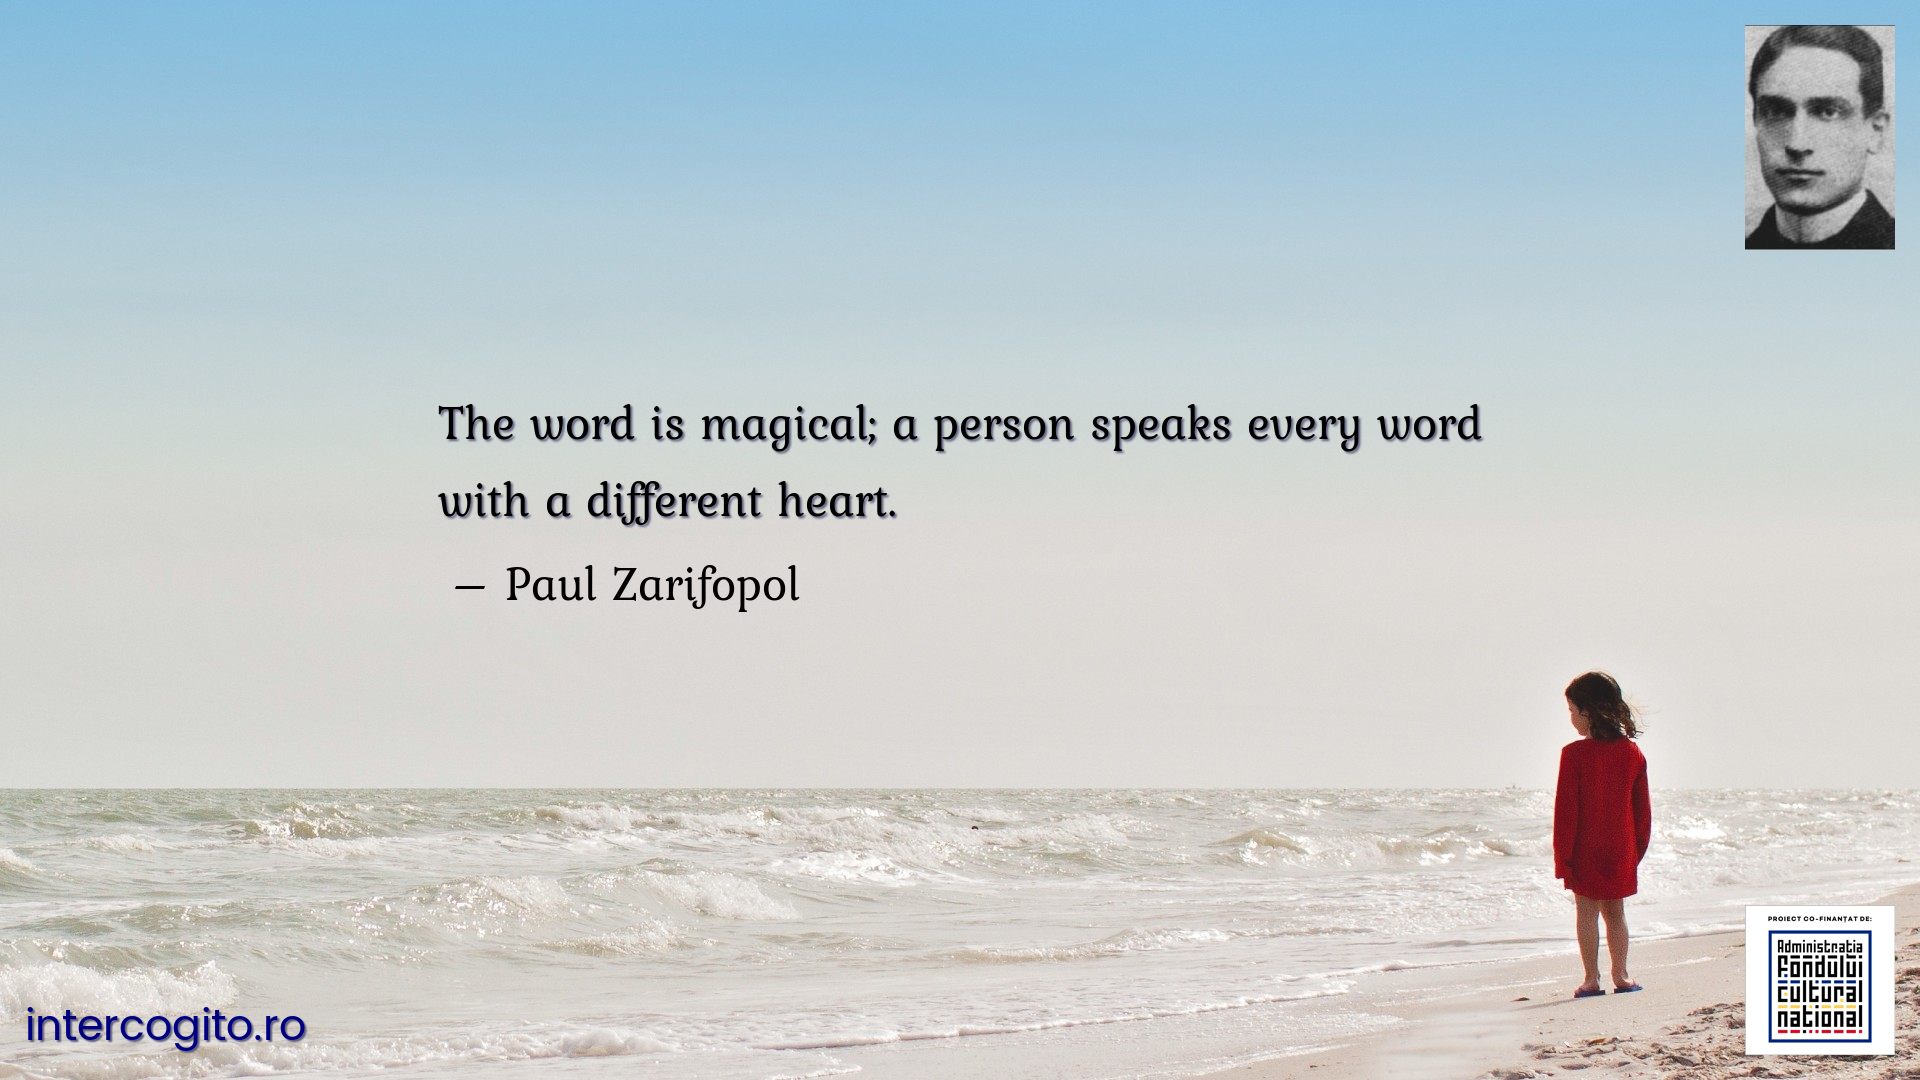 The word is magical; a person speaks every word with a different heart.